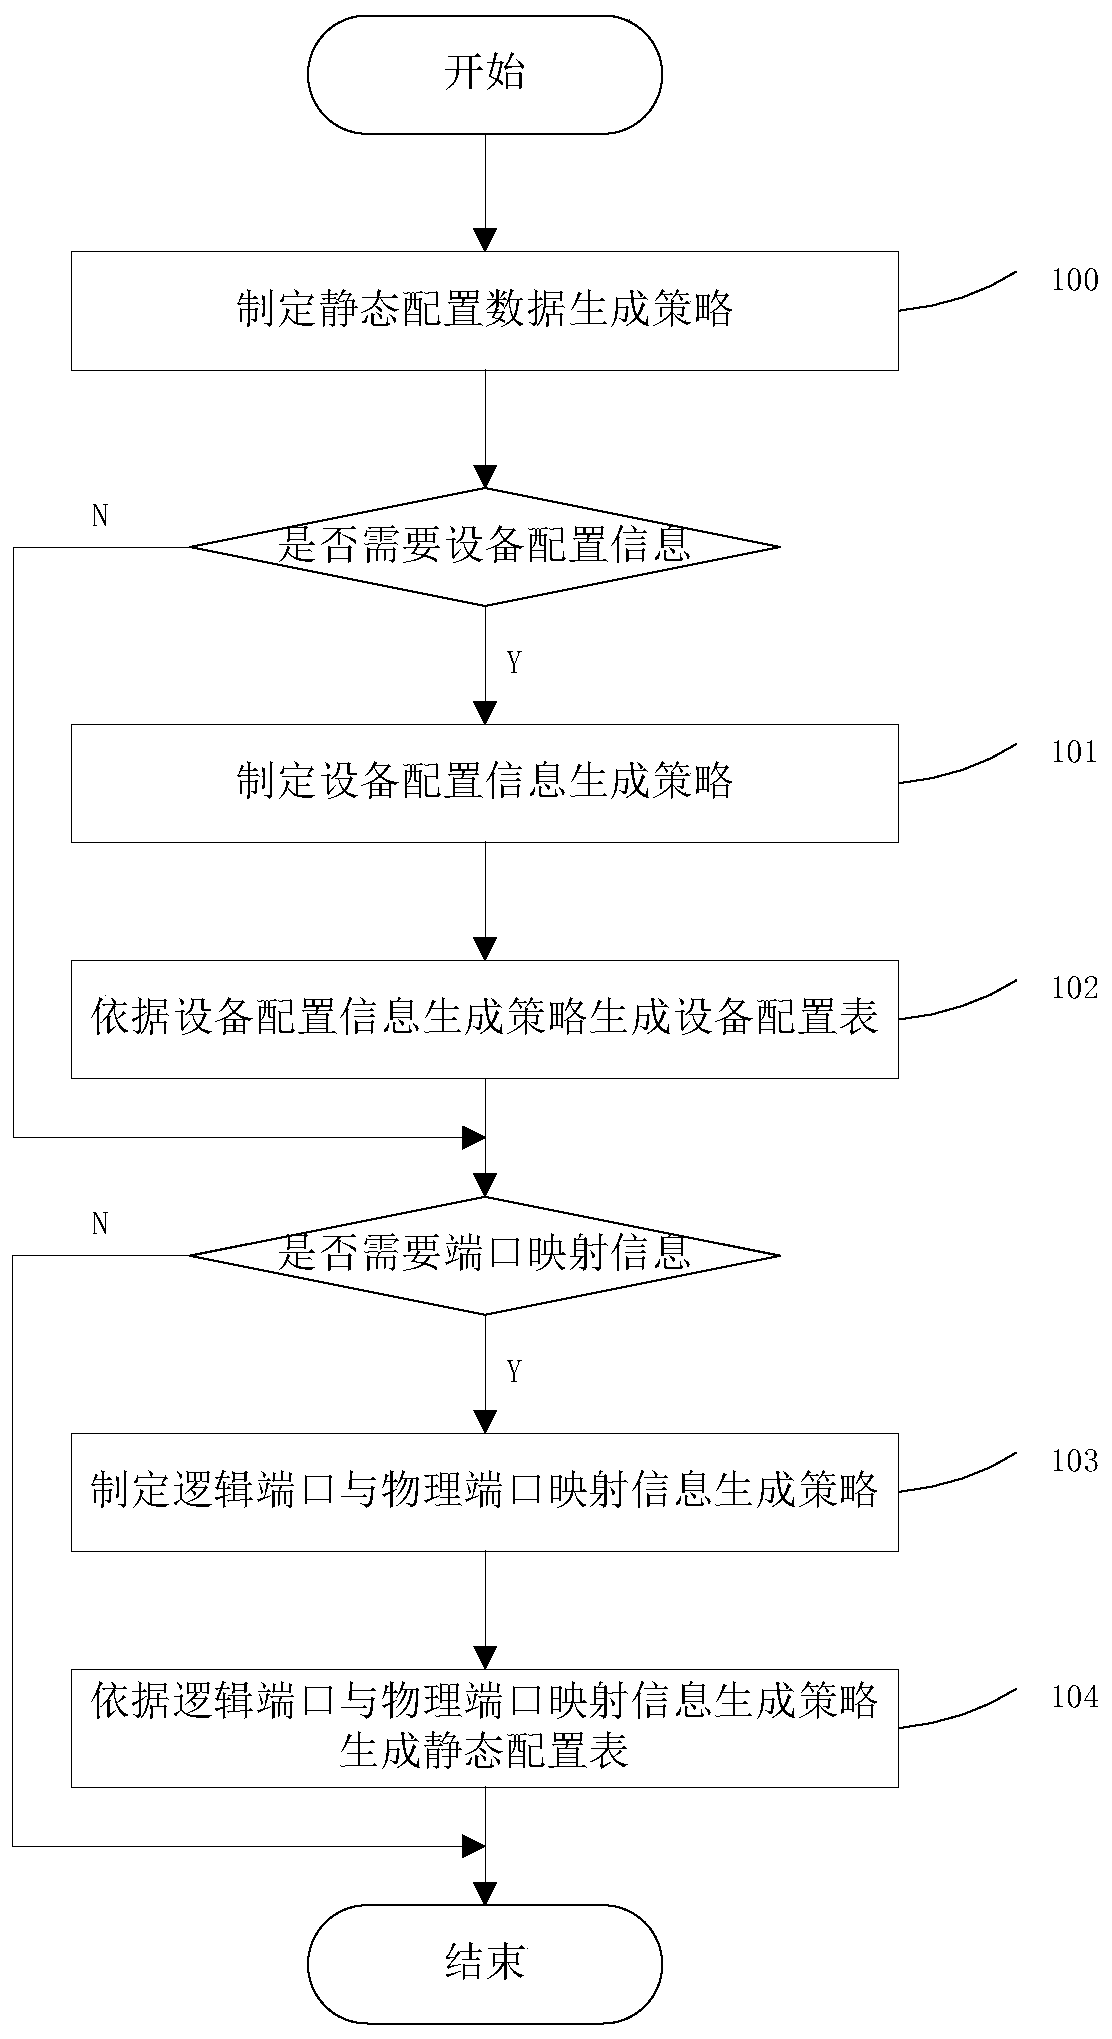 Implementation method for dynamic configuration of optical fiber channel switch